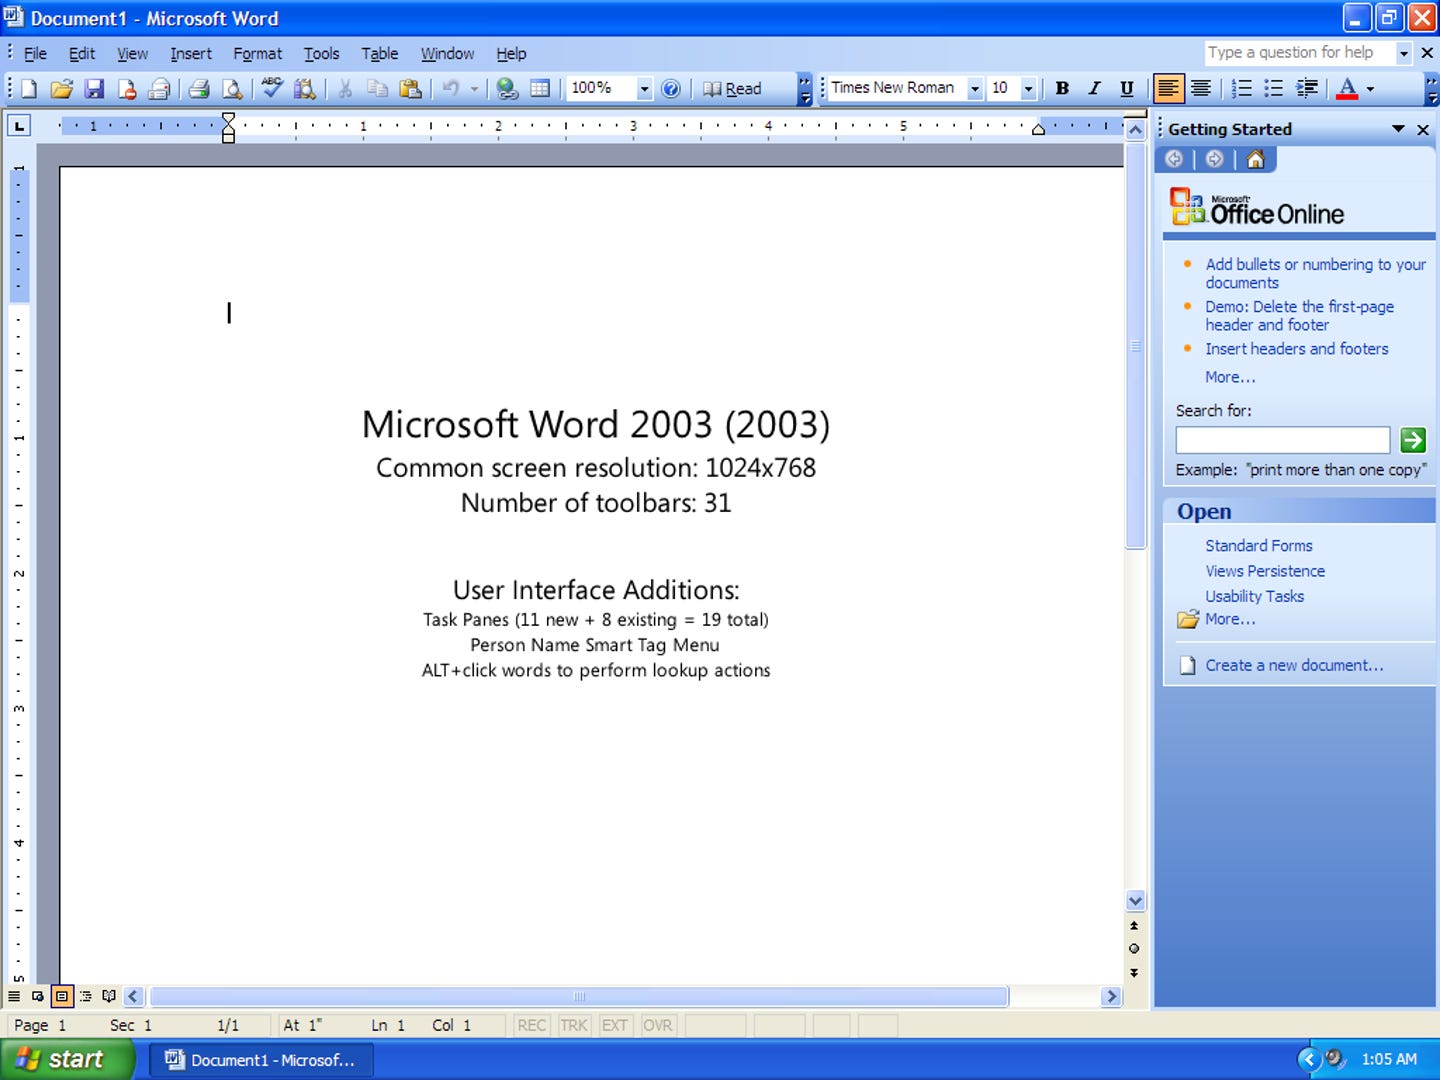 Microsoft Word 2003 (2003) Common screen resolution: 1024x768 Number of toolbars: 31 User Interface Additions: Task Panes (11 new + 8 existing = 19 total) Person Name Smart Tag Menu ALT+ click words to perform lookup actions